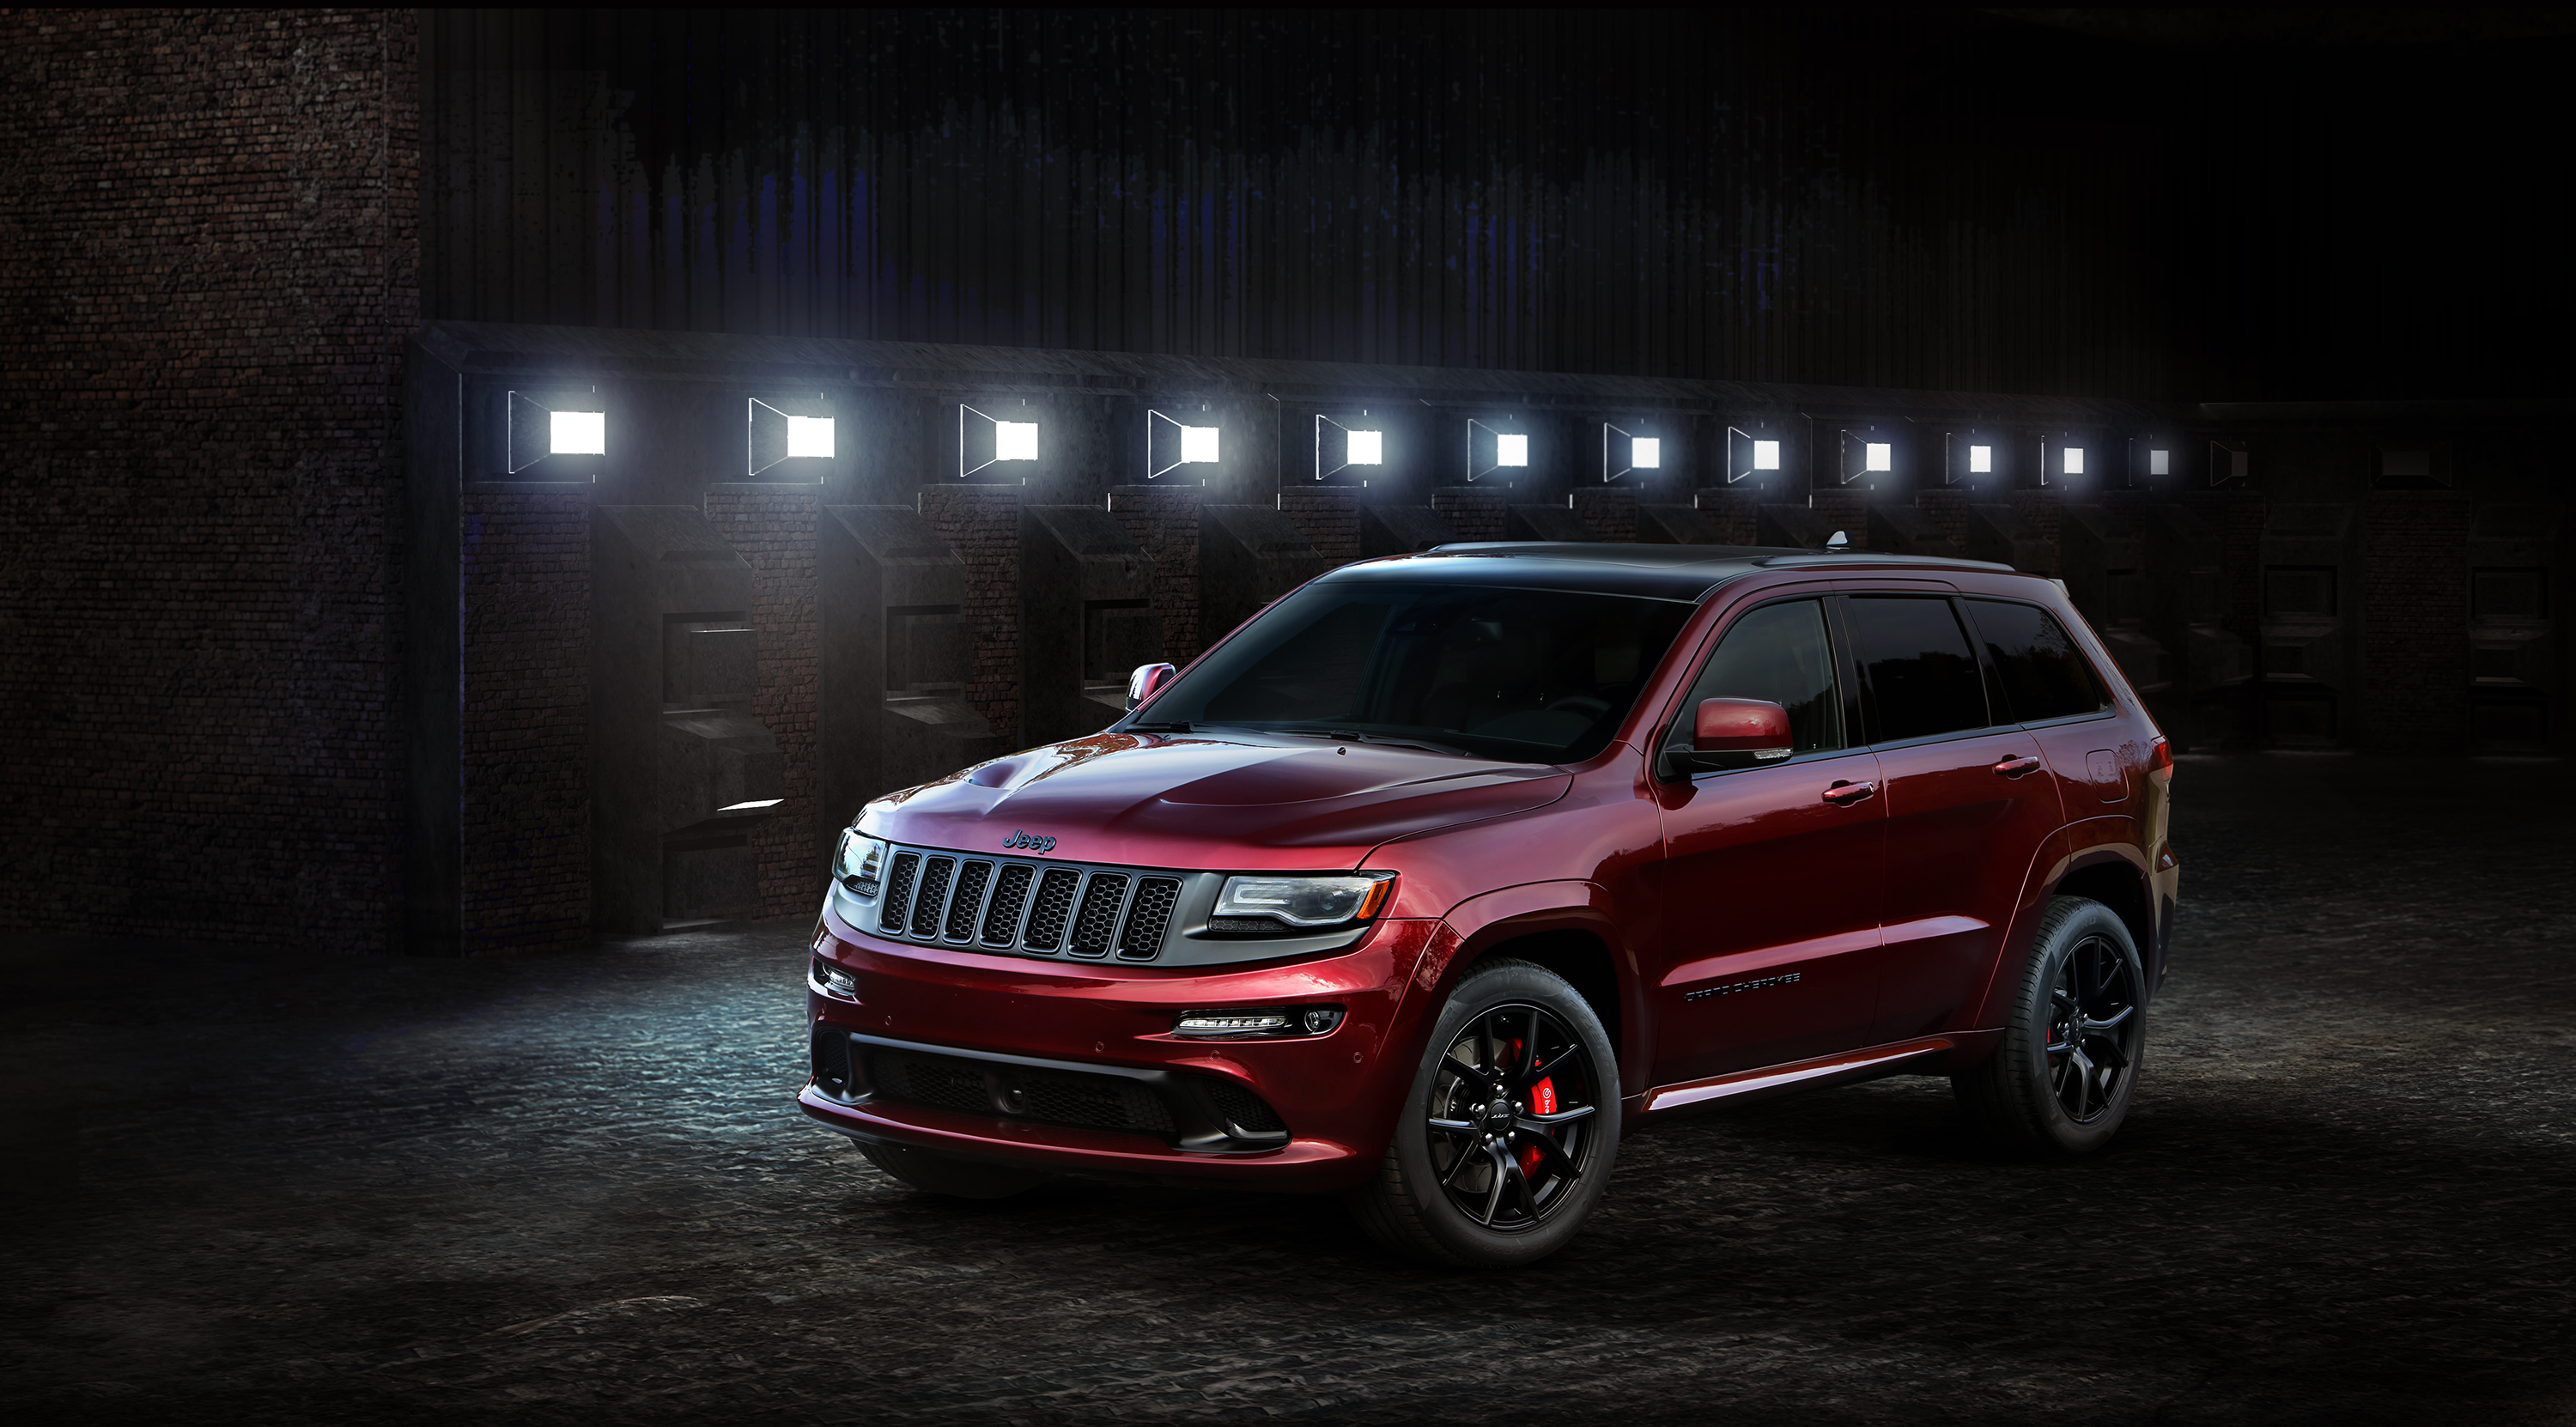 vehicles, jeep grand cherokee, jeep lock screen backgrounds